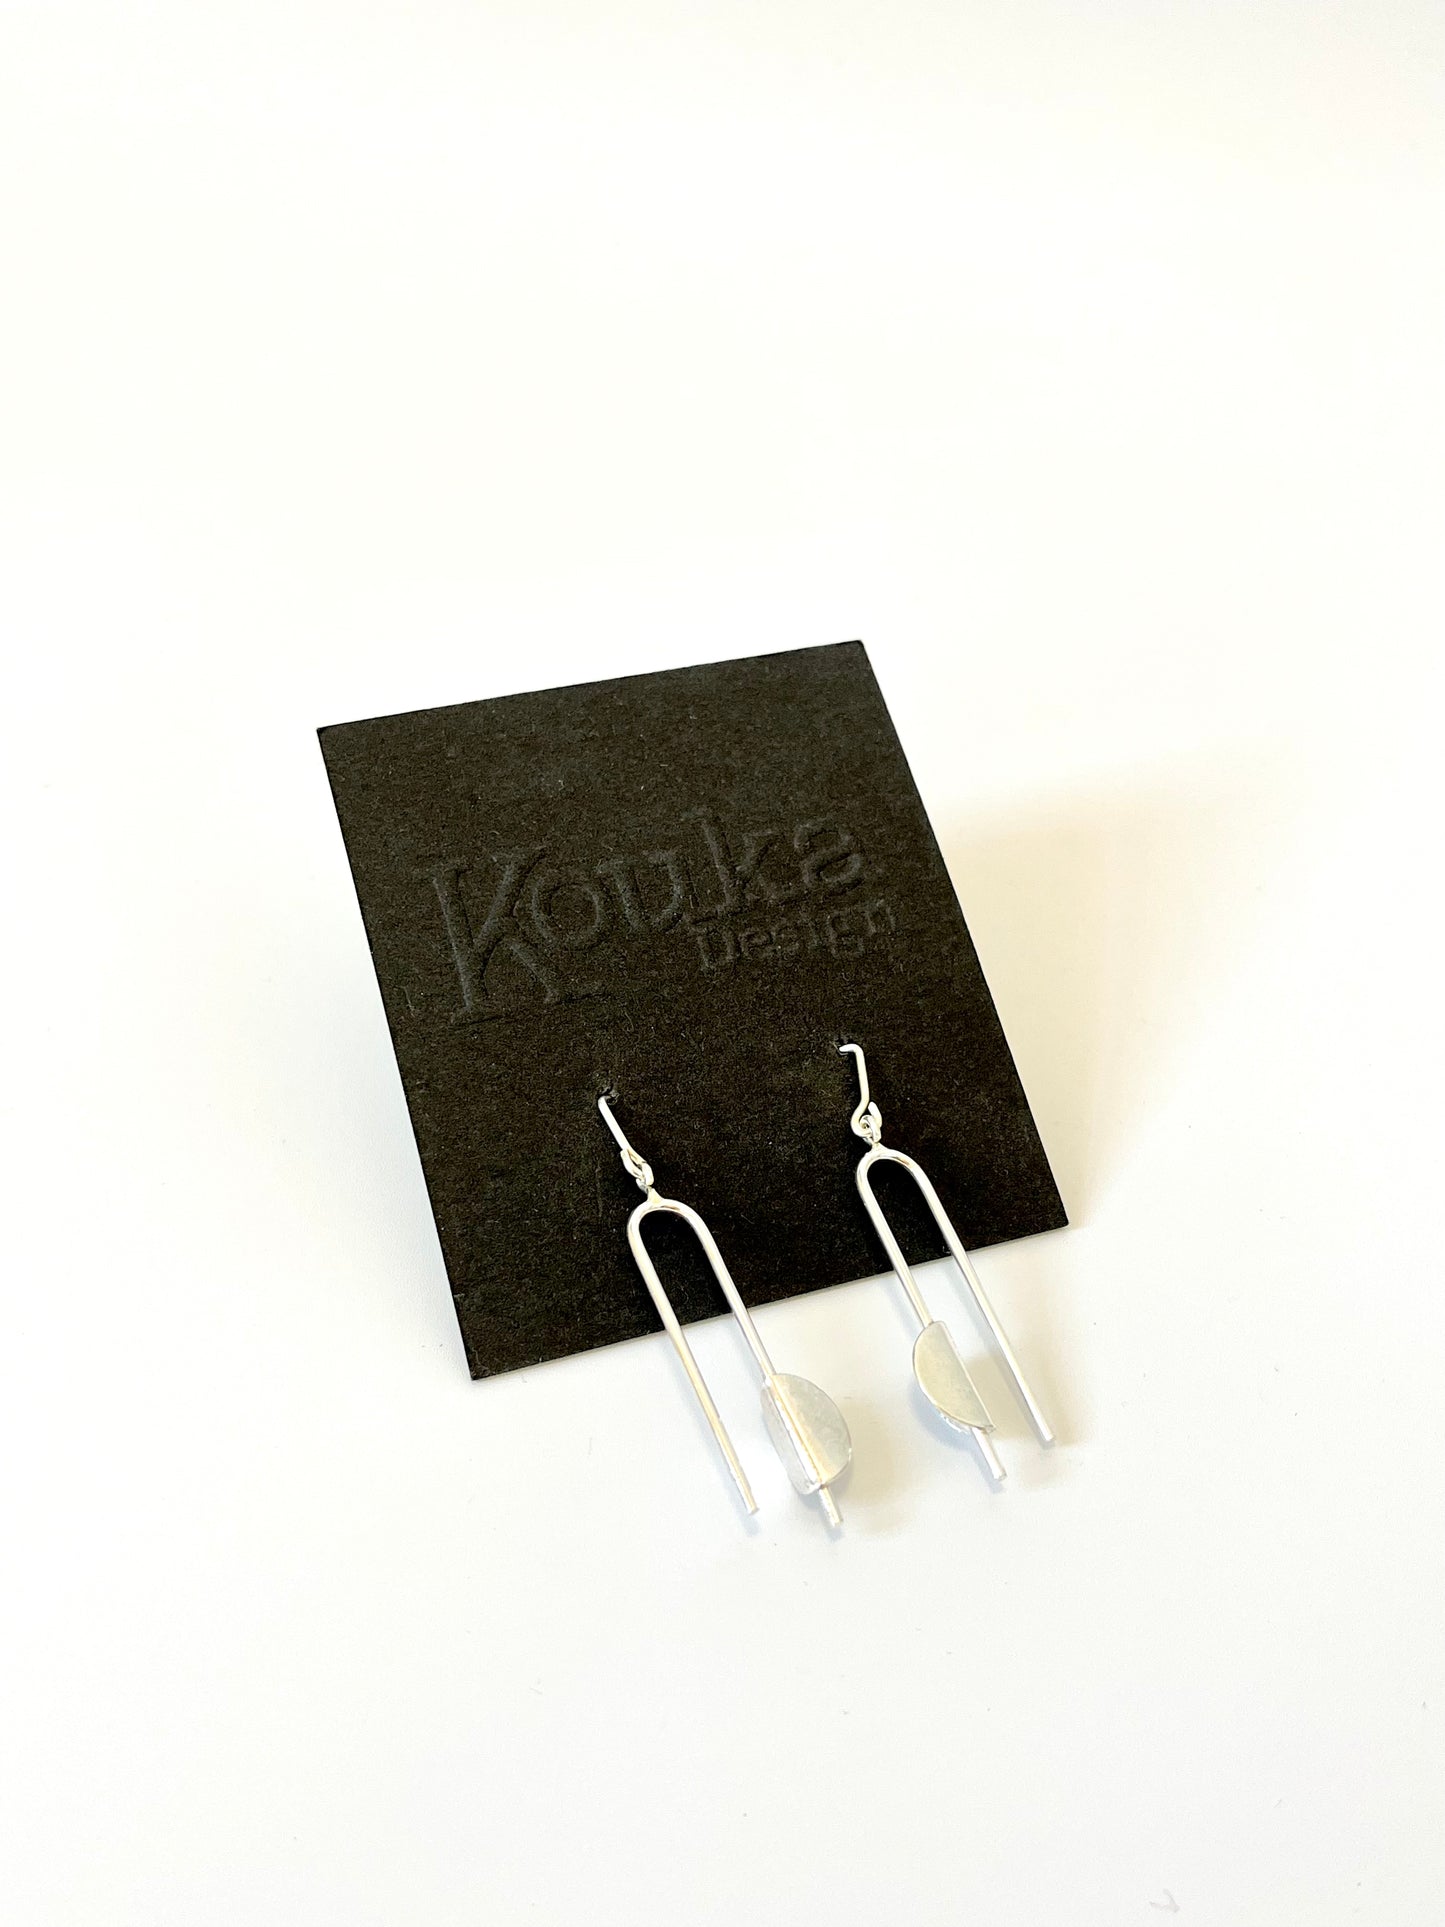 Silver N-Shape Earrings with Bent Disc